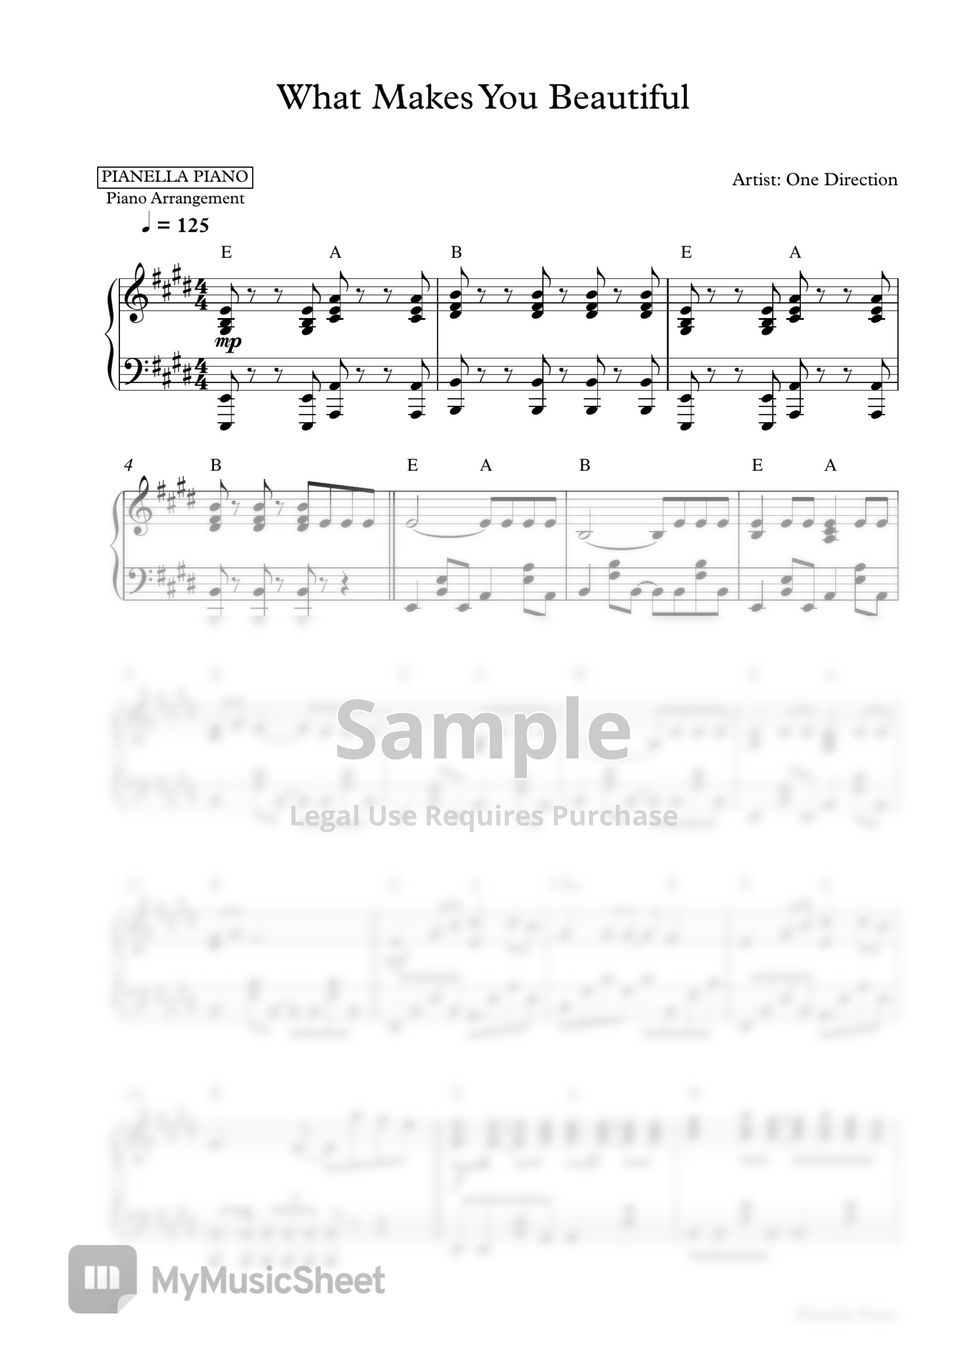 One Direction - What Makes You Beautiful (Piano Sheet) by Pianella Piano